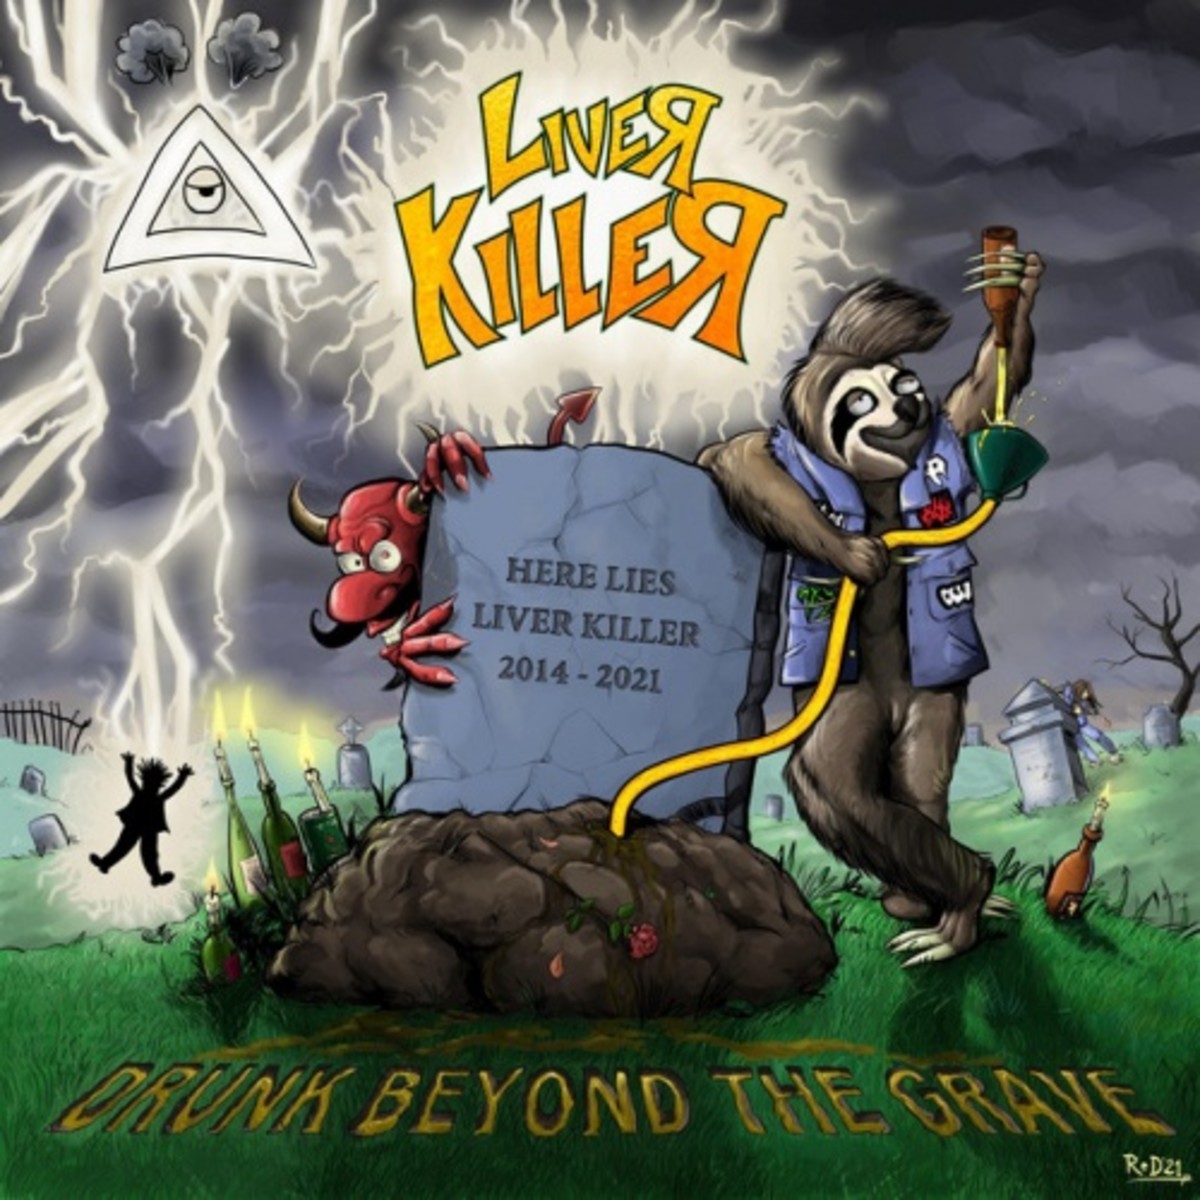 review-of-the-album-drunk-beyond-the-grave-by-barcelona-spains-thrash-metal-band-liver-killer